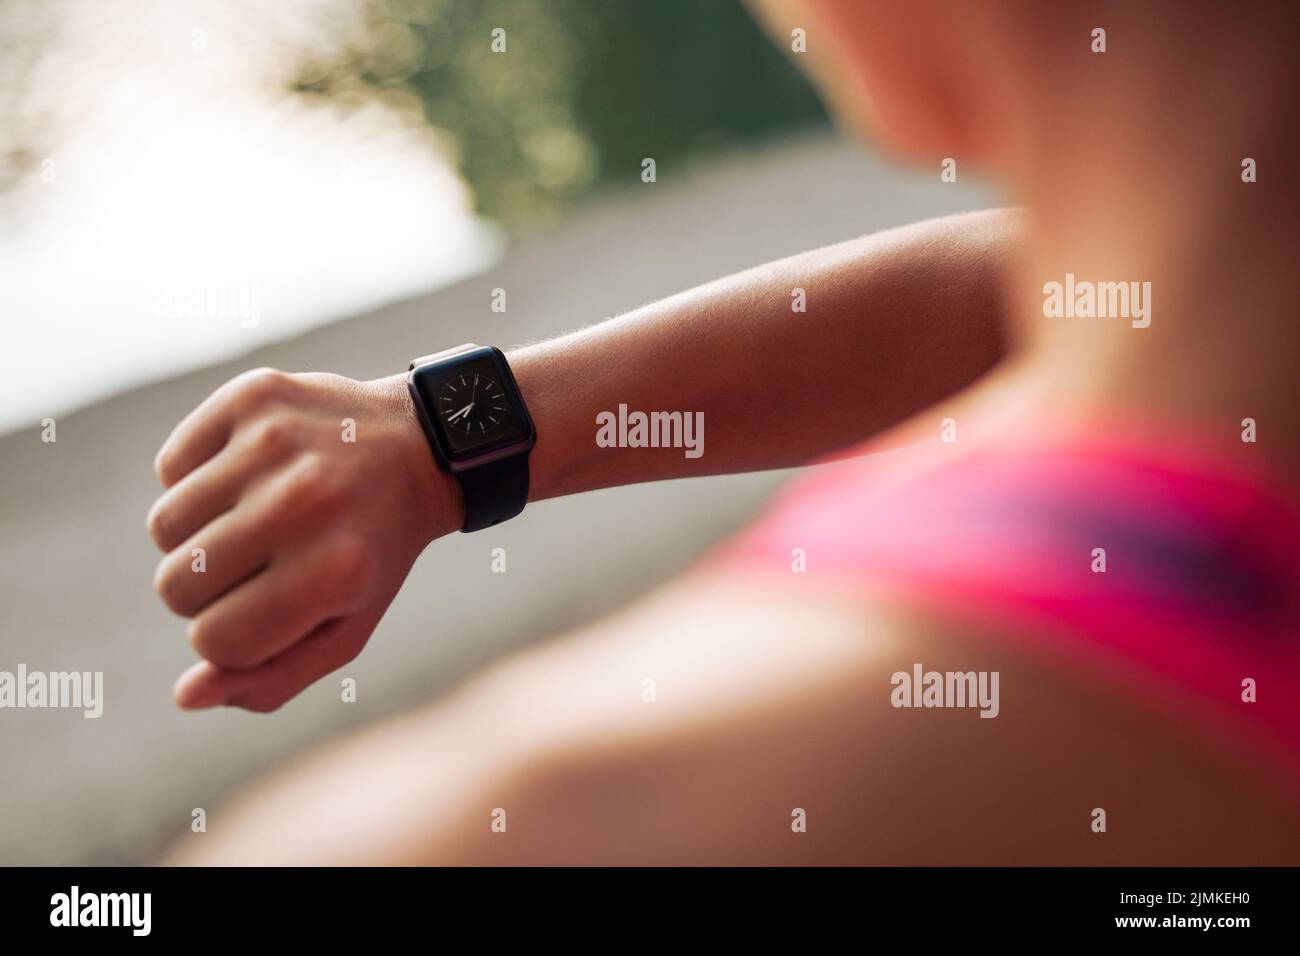 Close up image of young woman checking the time on smartwatch device after jog, outdoors. Stock Photo